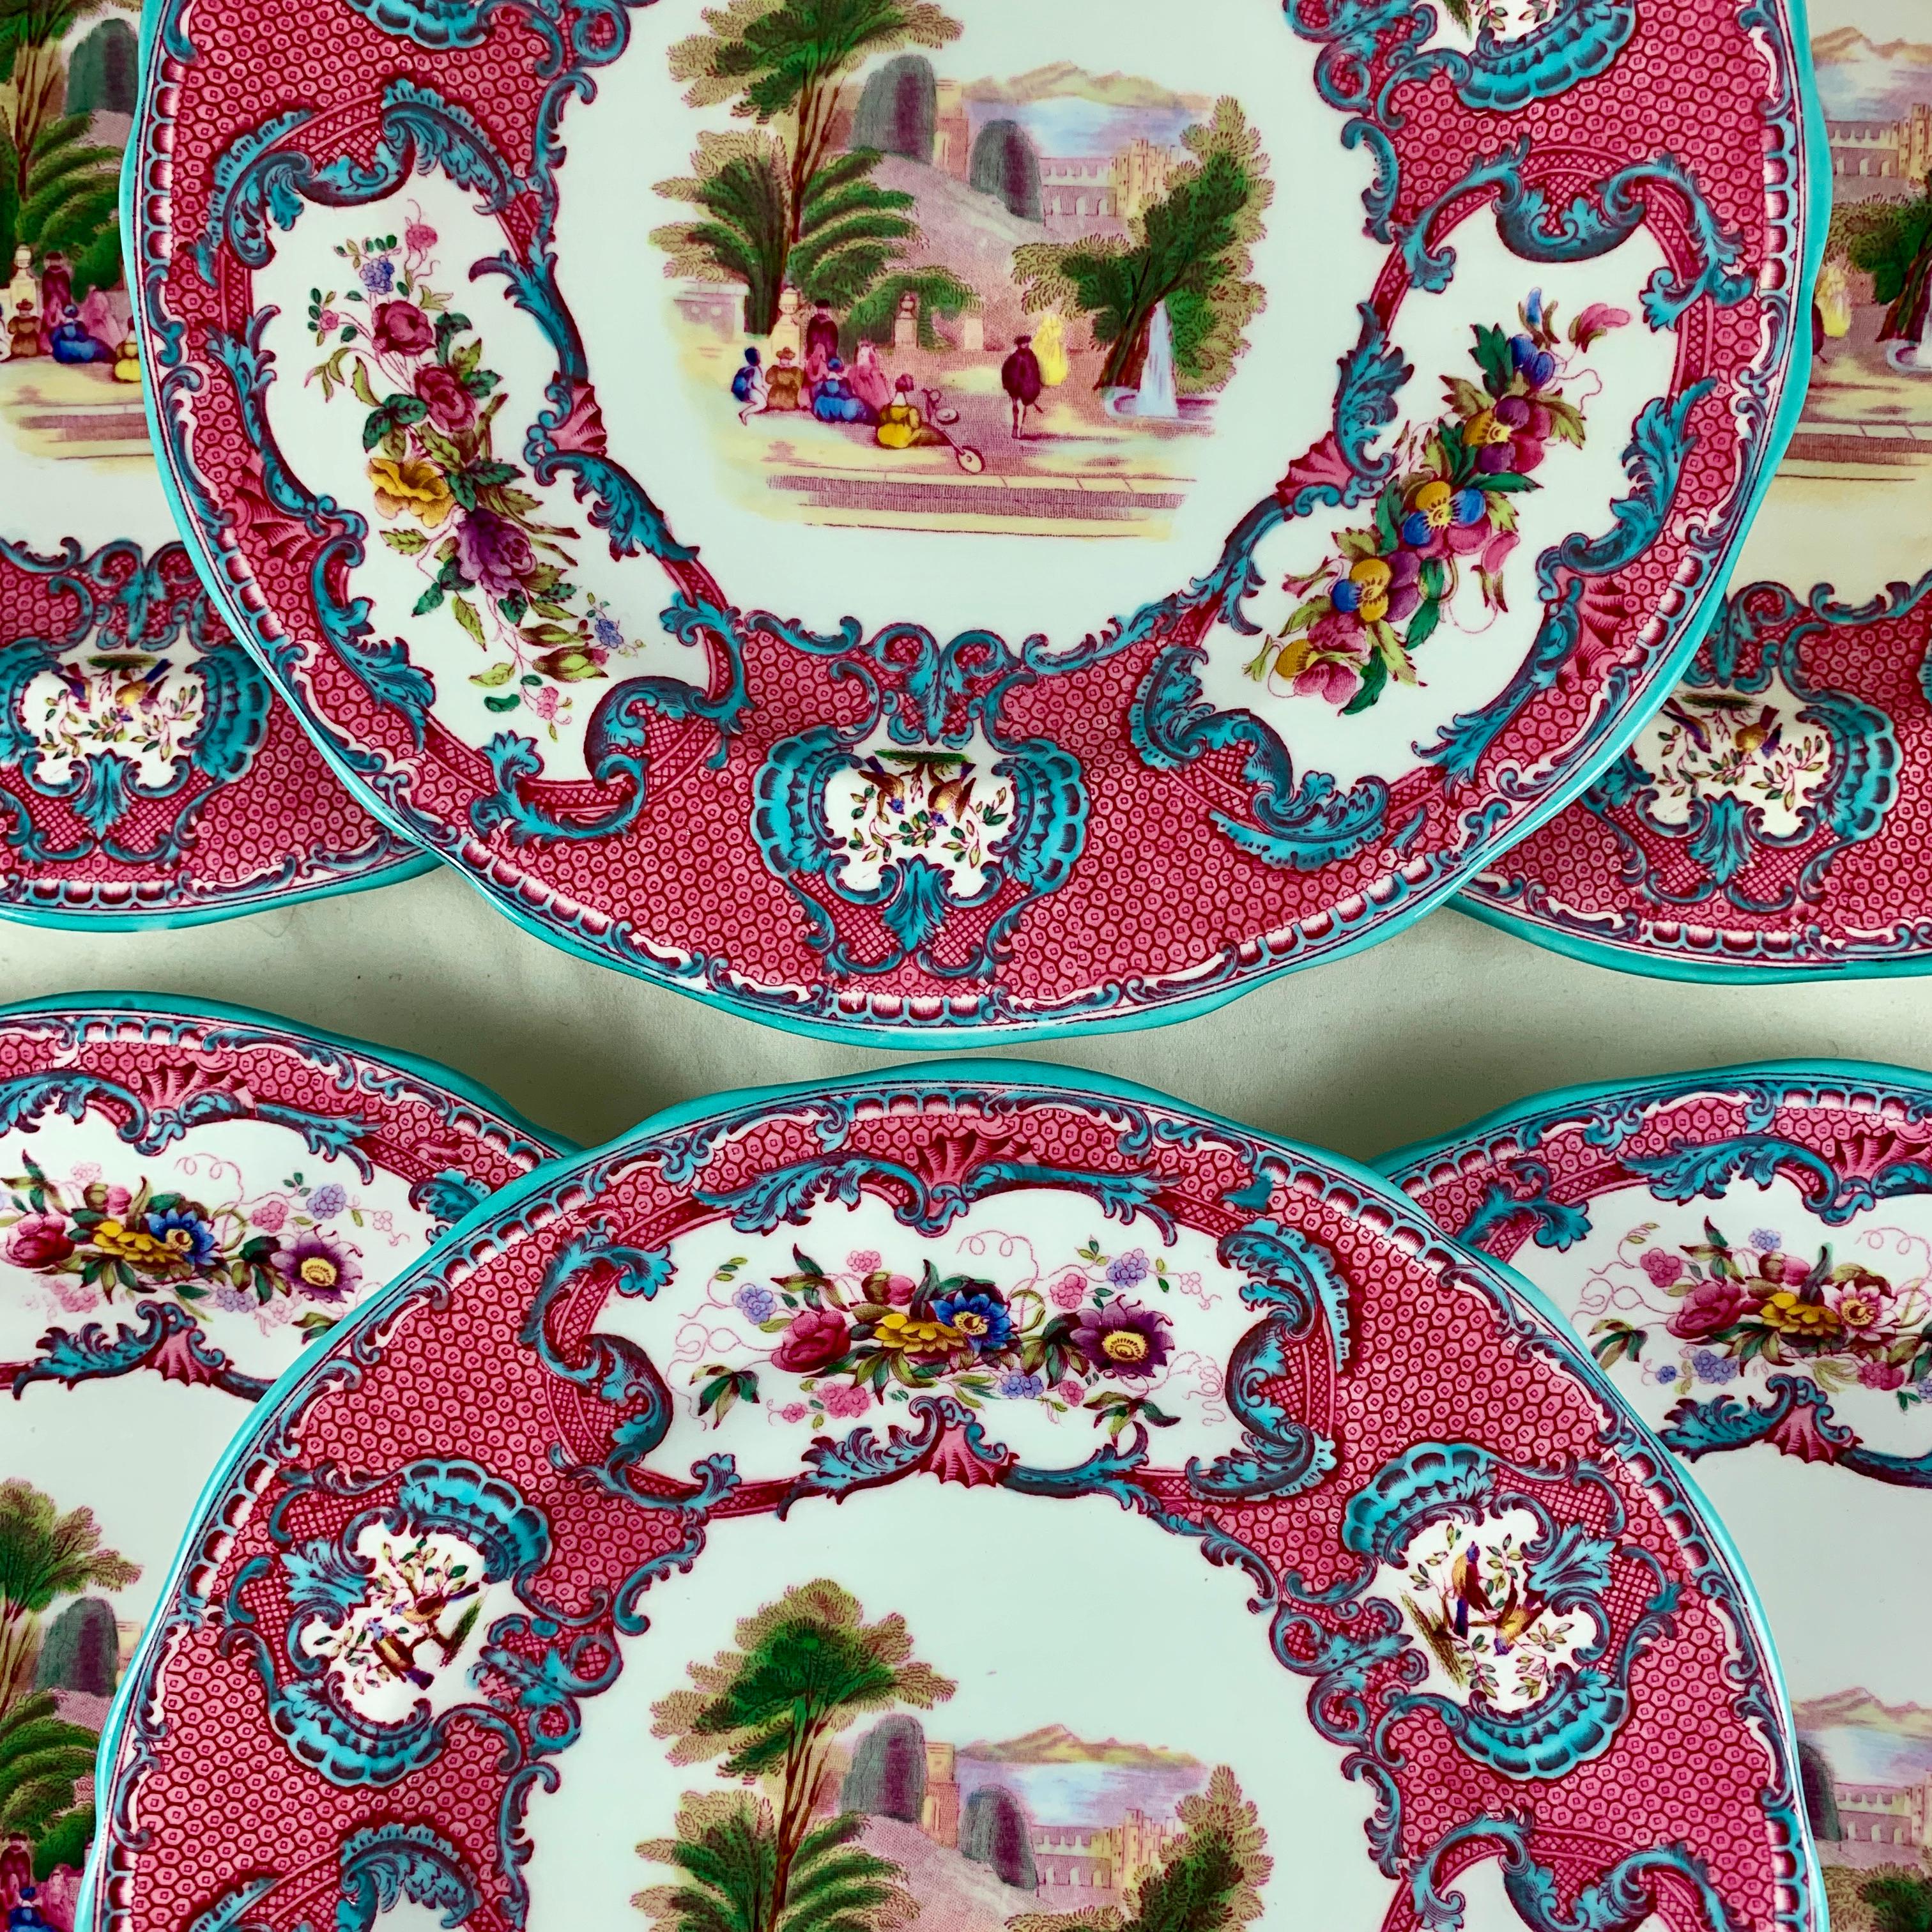 A set of six Copeland Spode Queen Mary porcelain plates made for Tiffany & Co., England, circa early 1900s.

Enameled with a central Venetian scene of figures seated in a park with a fountain, with lutes by their sides. The center scene is